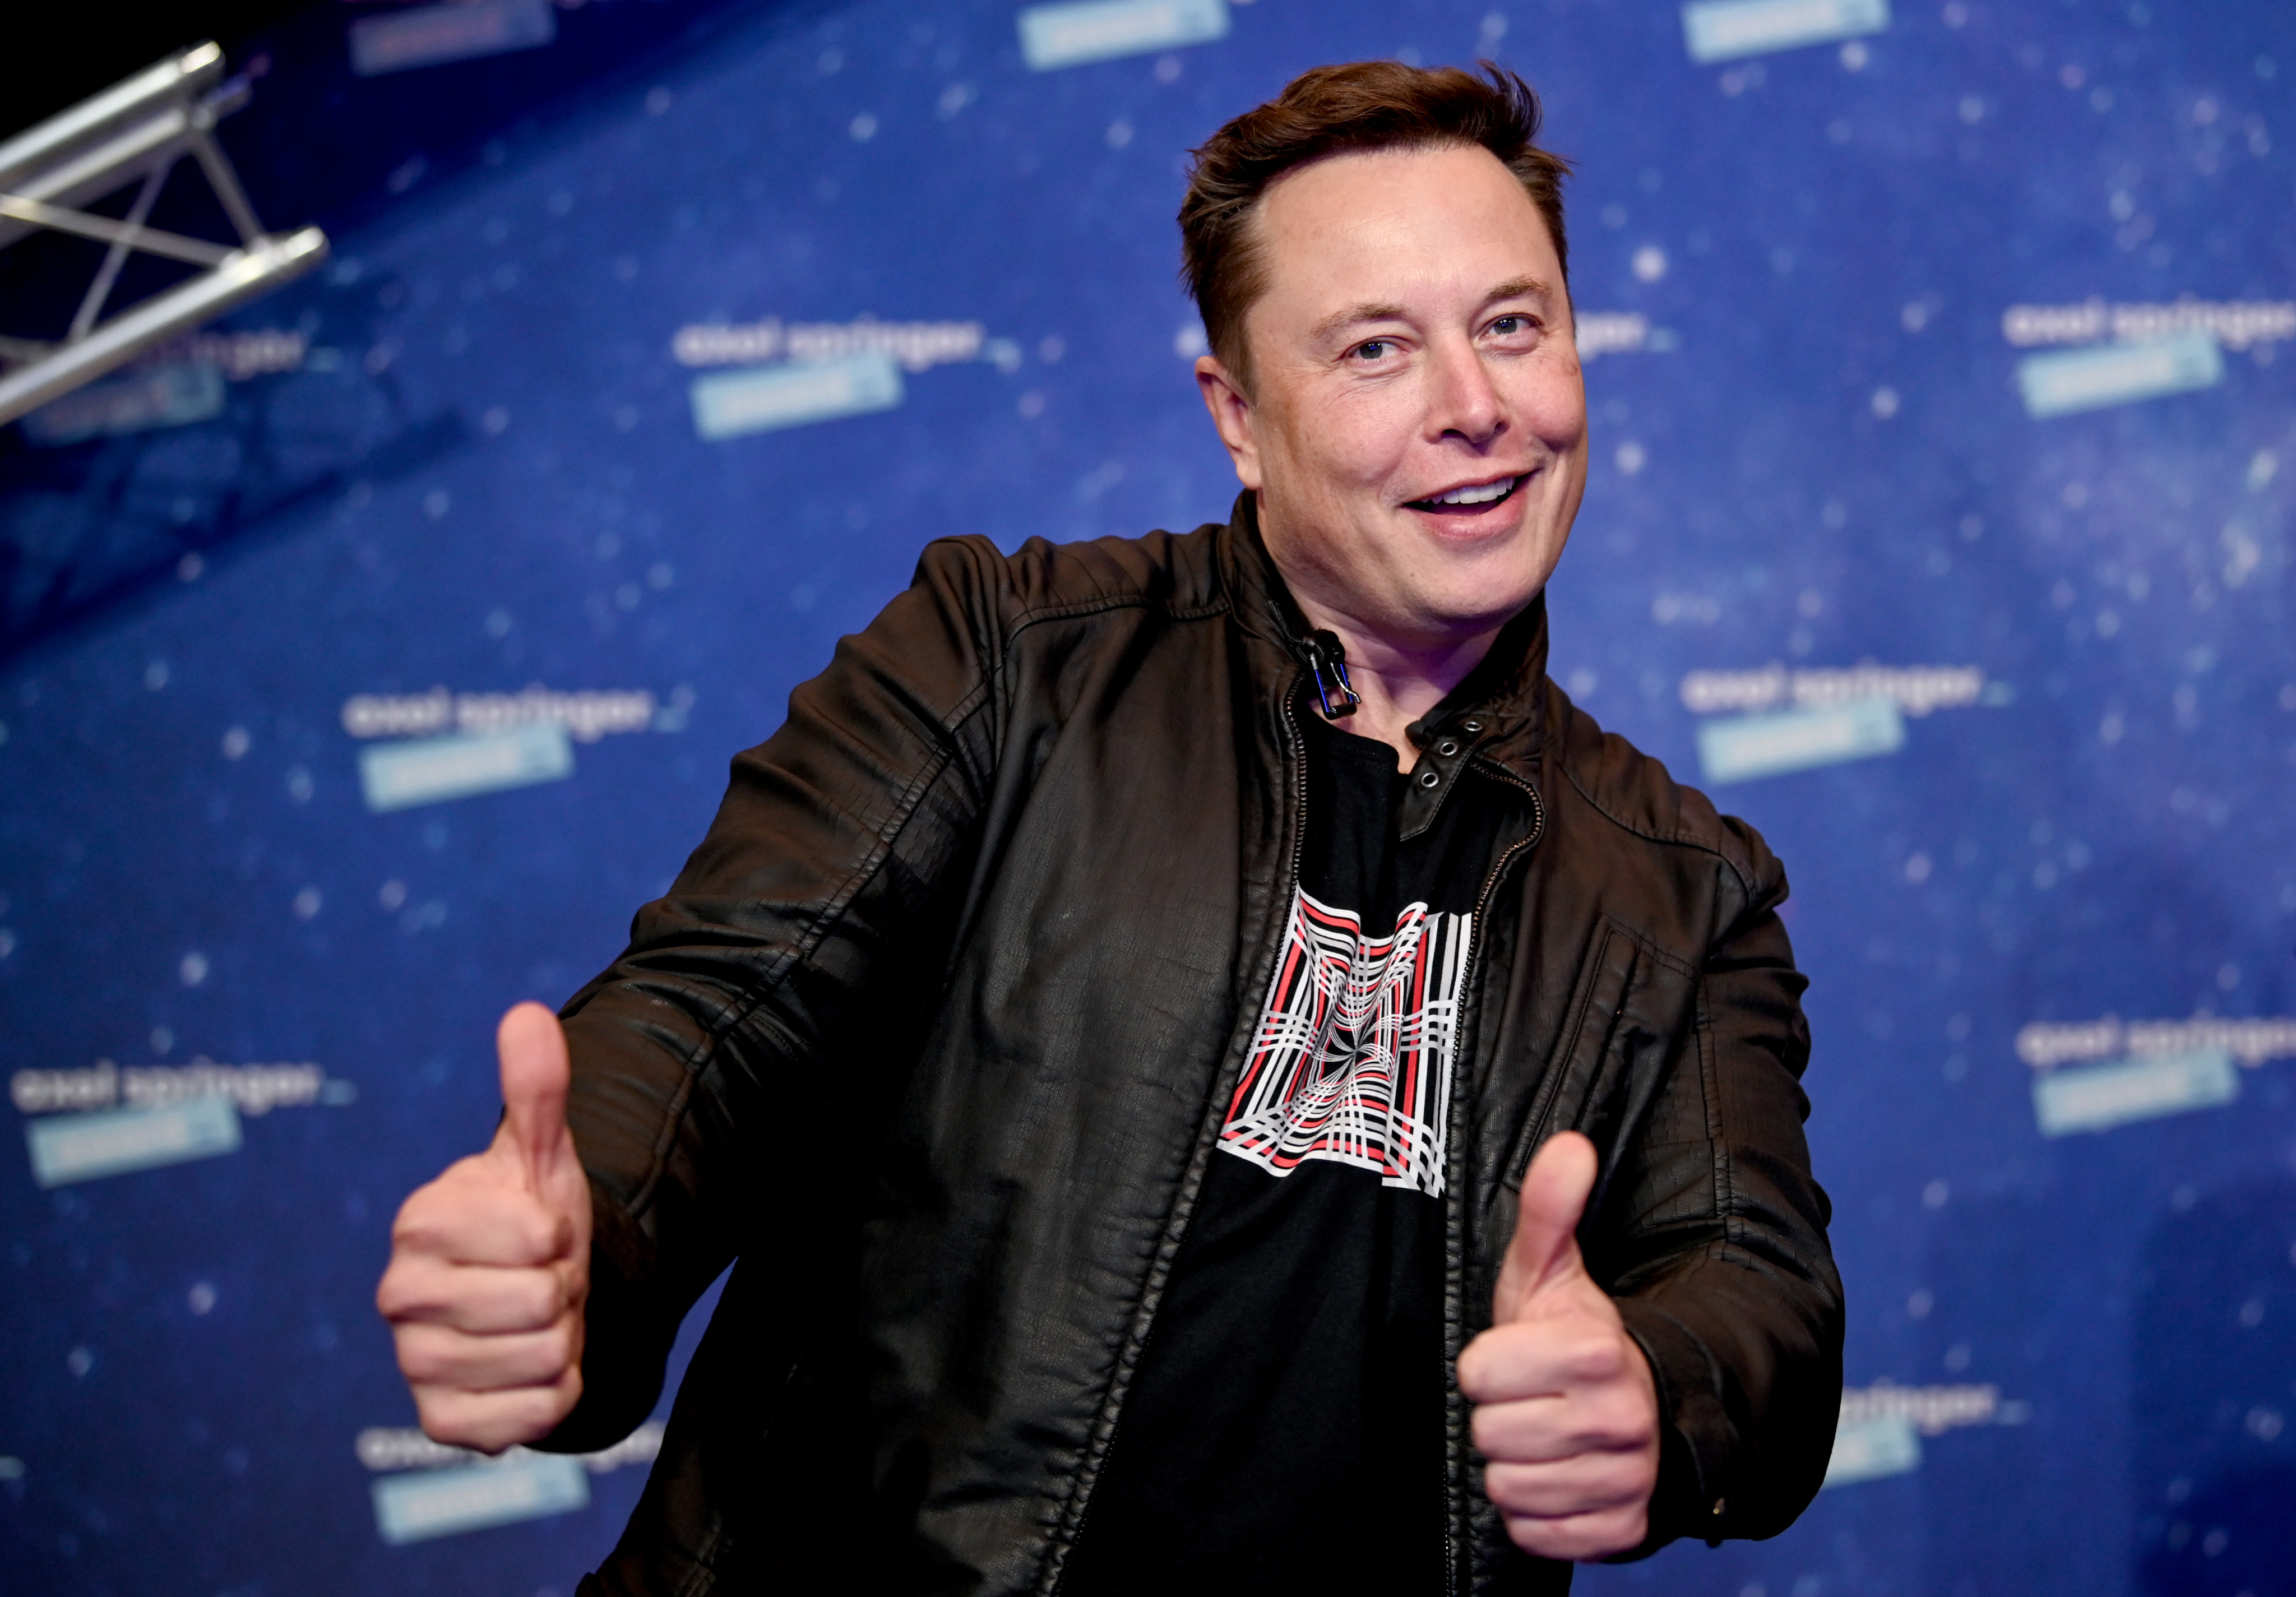 Tesla CEO Elon Musk arrives at an event in Berlin in December 2020. Photo: dpa